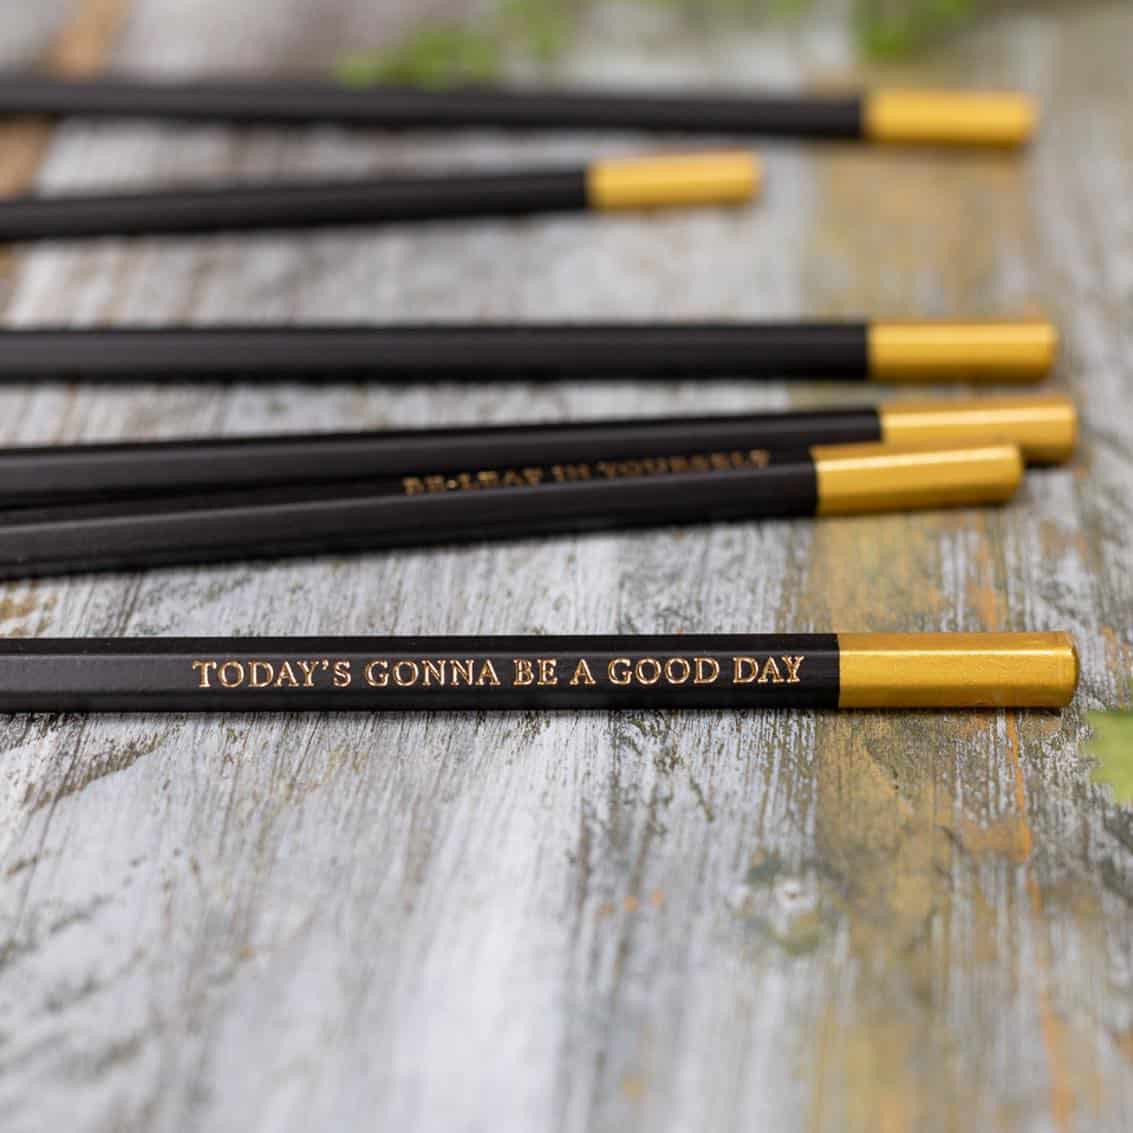 Bees & Honeysuckle Set of 6 Pencils by Toasted Crumpet.